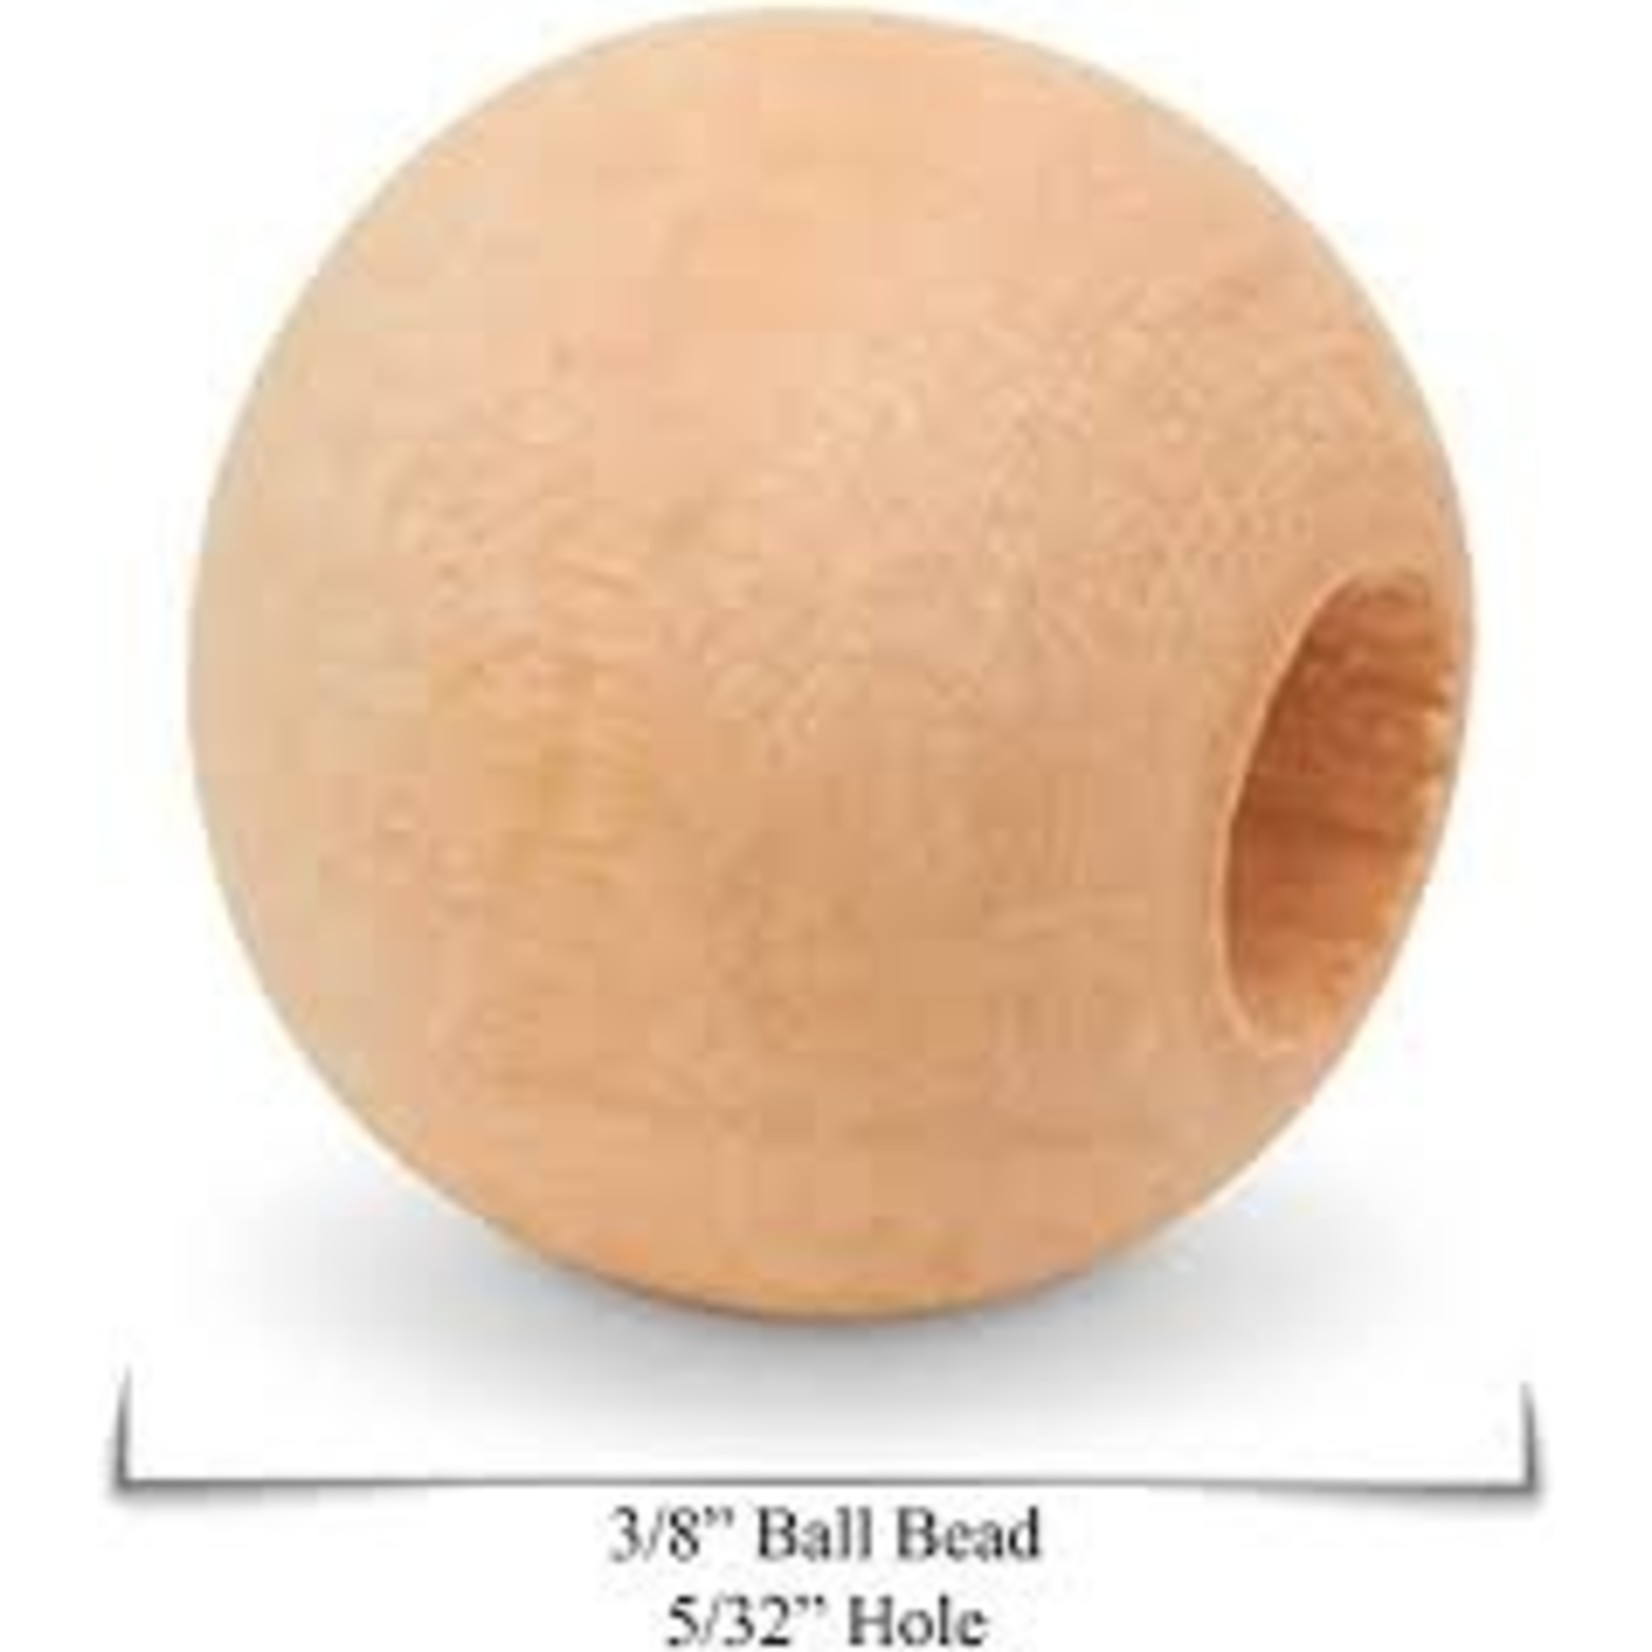 WOODEN ROUND BEADS - 3/8 IN-5/32IN HOLE 10pk